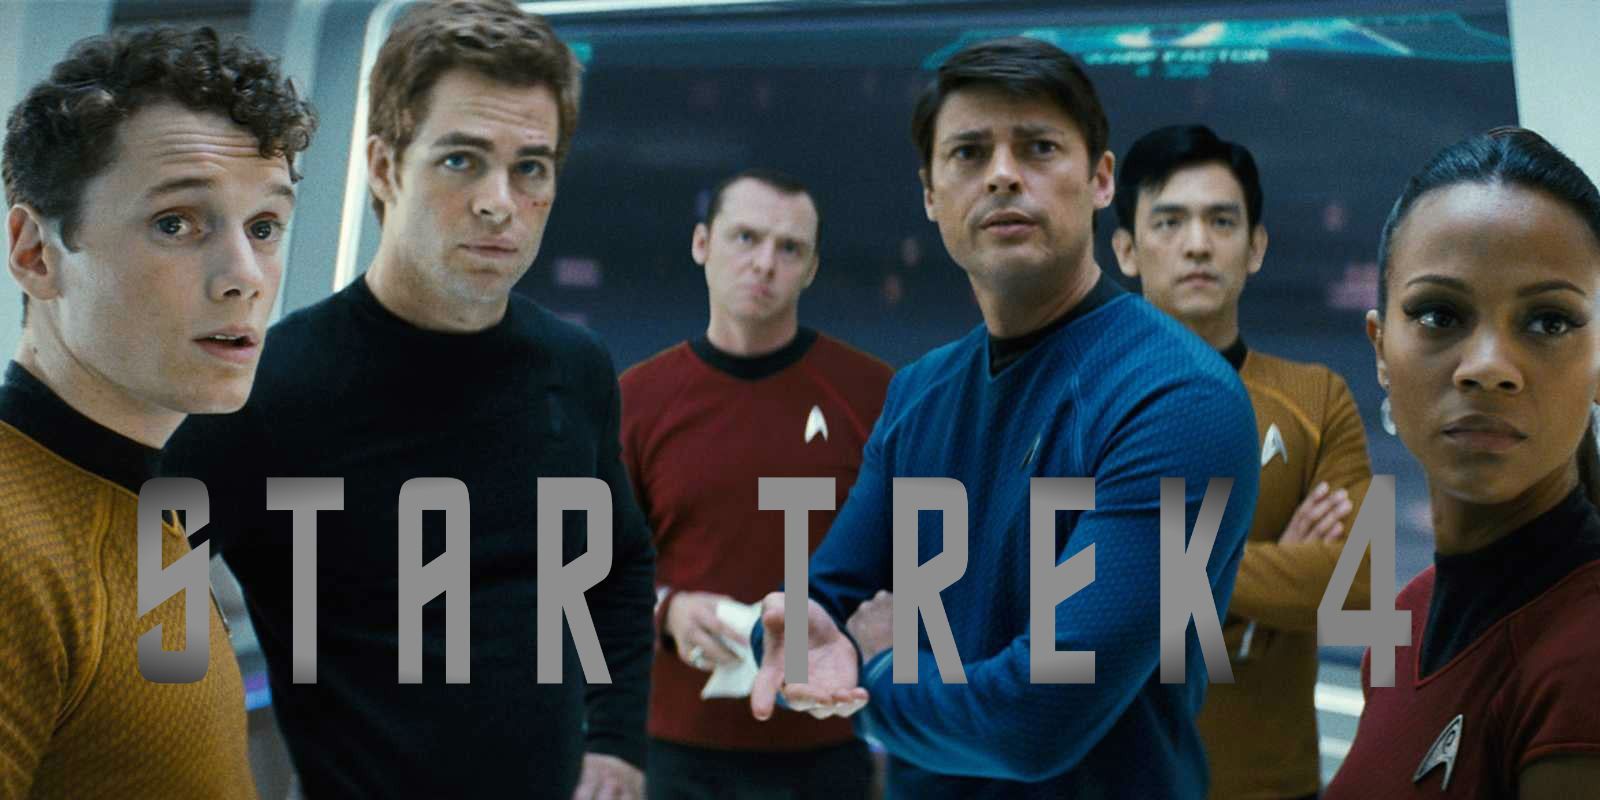 Star Trek 4 Rumored To Be Cancelled, No More Movies In Development [UPDATED]